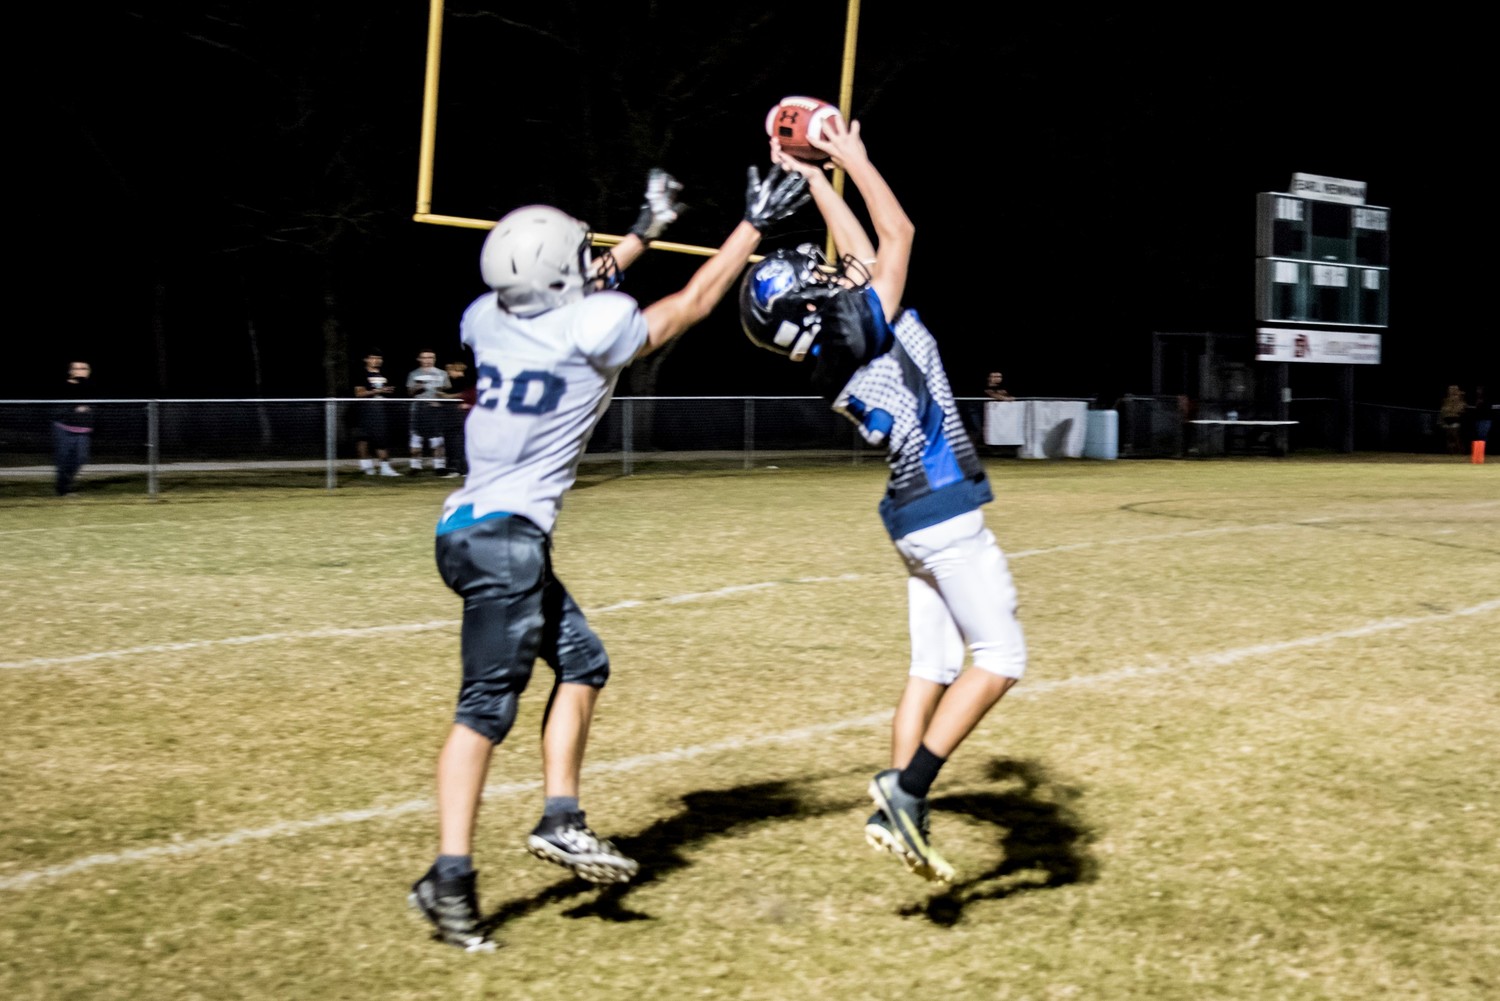 A Lions receiver goes vertical for the catch.